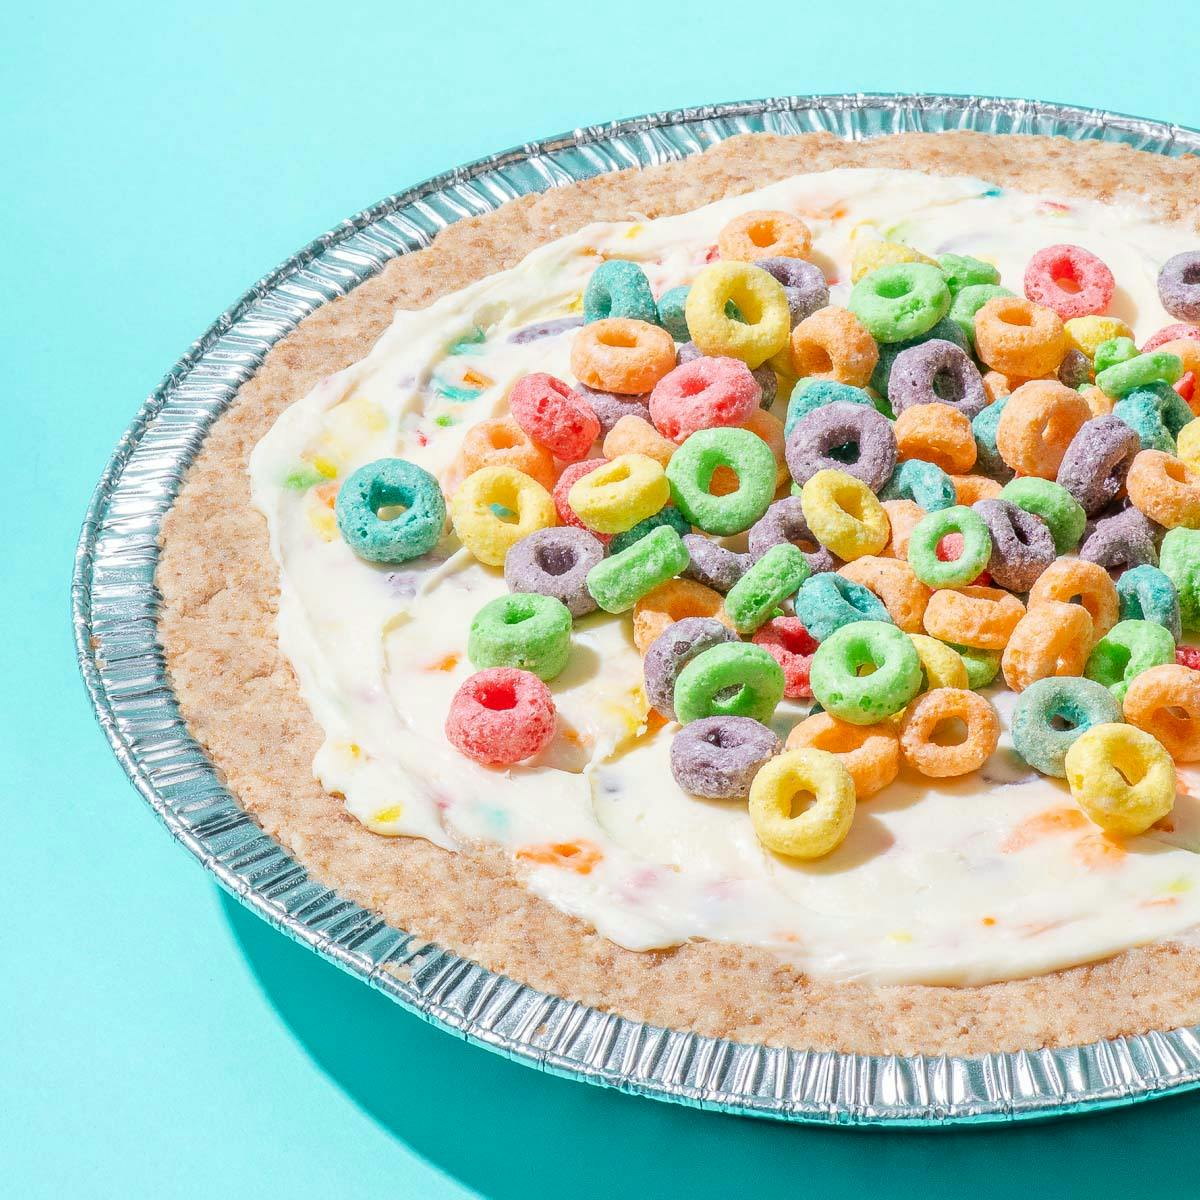 Cereal Killer Pie by The Pie Hole Goldbelly